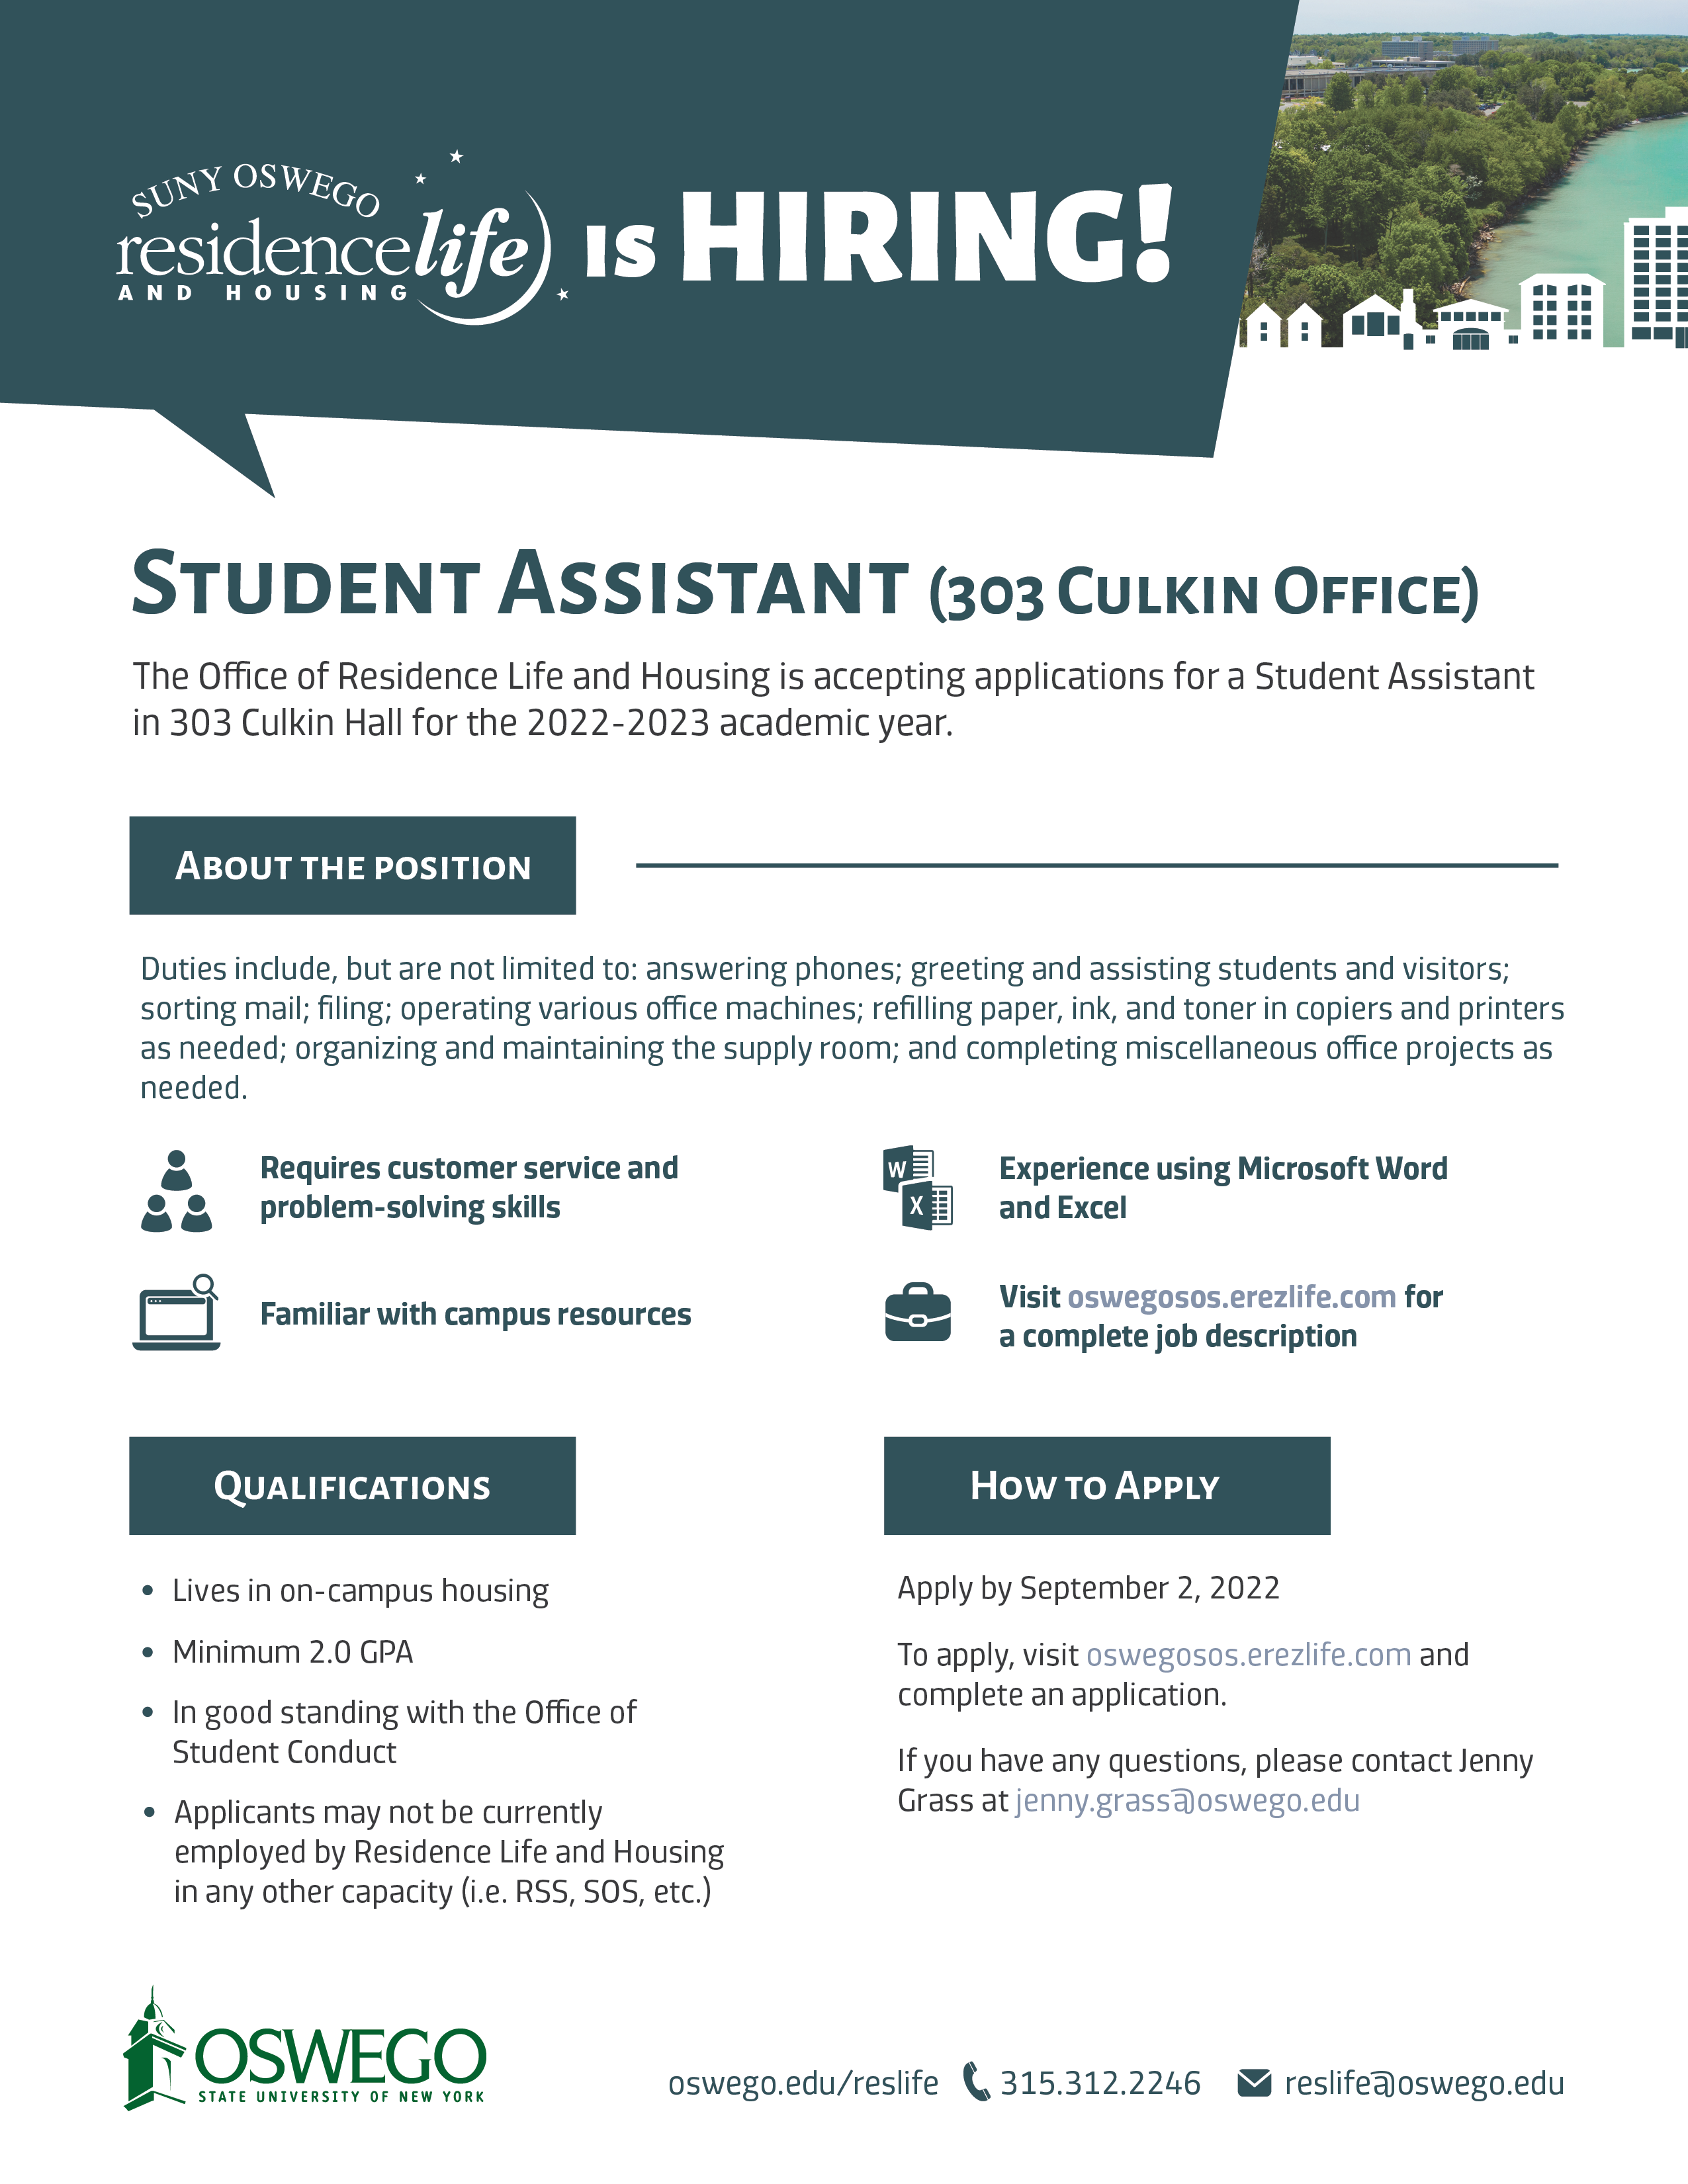 Flyer advertising Student Assistant position available in the 303 Culkin Office at the Department of Residence Life and Housing